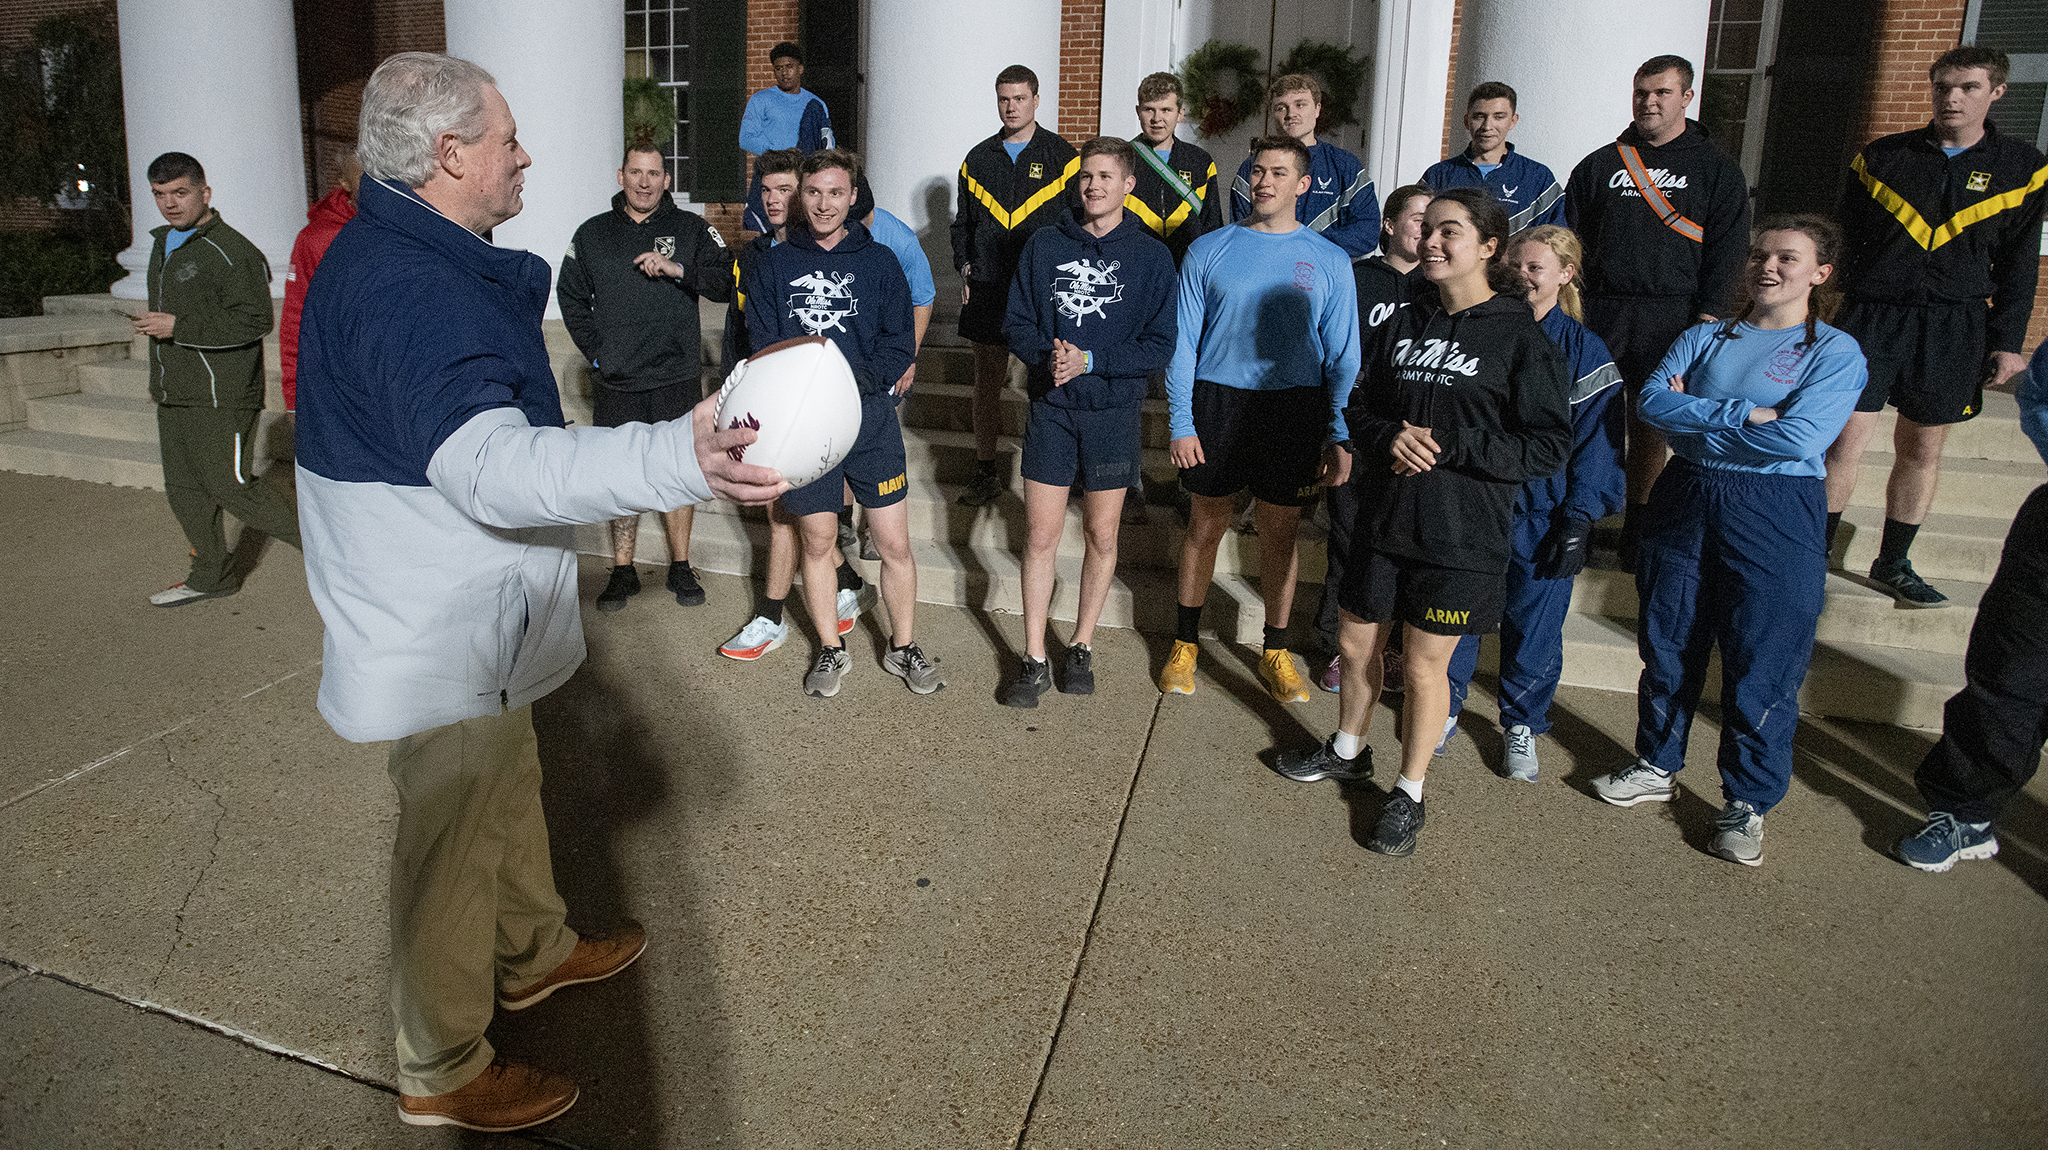 Chancellor Glenn Boyce addresses cadets of the Magnolia Battalion after the 10th annual Egg Bowl Run, in which Ole Miss and Mississippi State cadets relayed the Egg Bowl game ball nearly 100 miles across north Mississippi. Photo by Thomas Graning/Ole Miss Digital Imaging Services